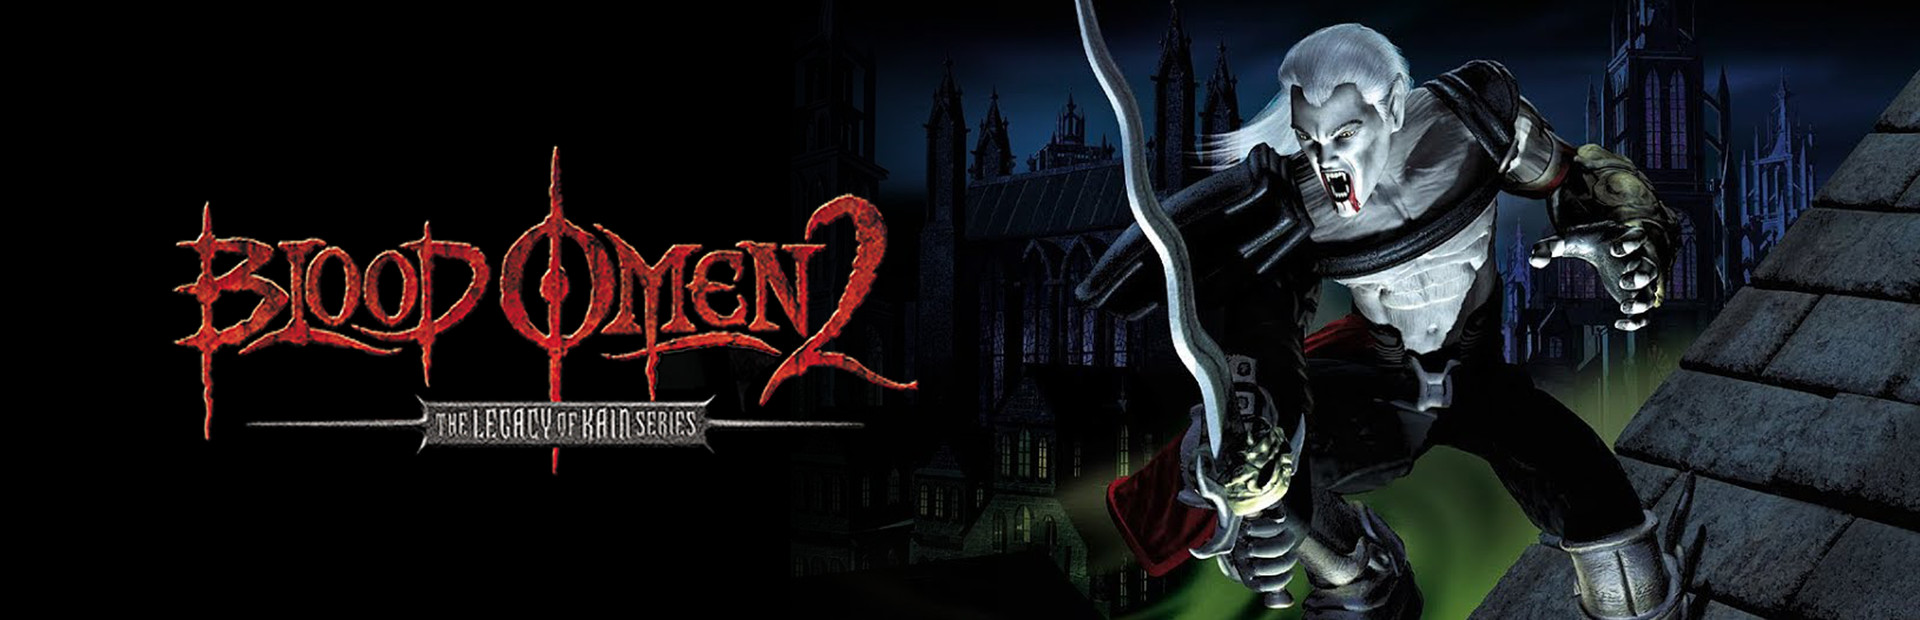 Blood Omen 2: Legacy of Kain cover image